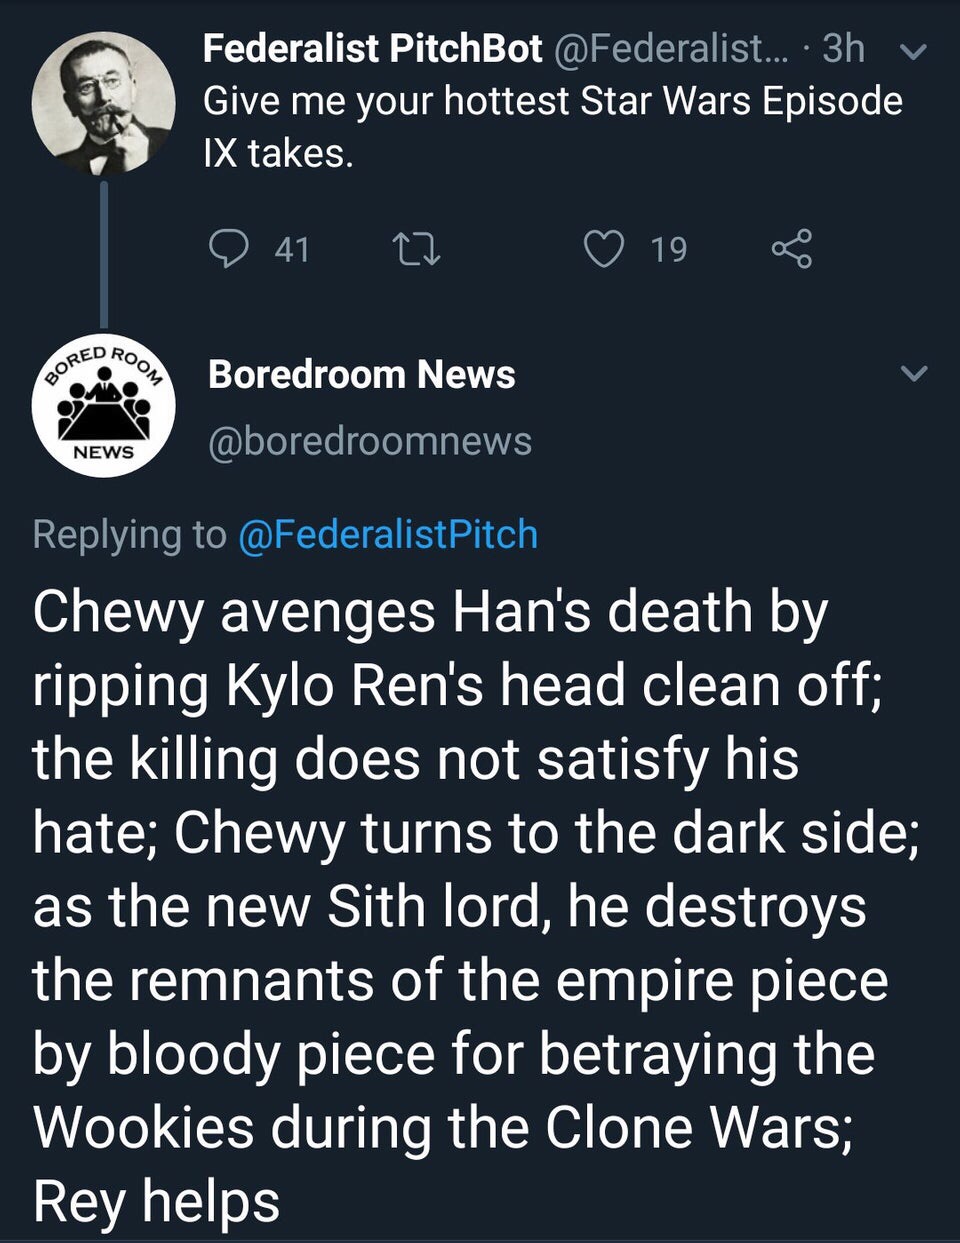 screenshot - Federalist PitchBot .... 3h v Give me your hottest Star Wars Episode Ix takes. 0 41 22 19 8 Ed Roo Bored Boredroom News News Chewy avenges Han's death by ripping Kylo Ren's head clean off; the killing does not satisfy his hate; Chewy turns to